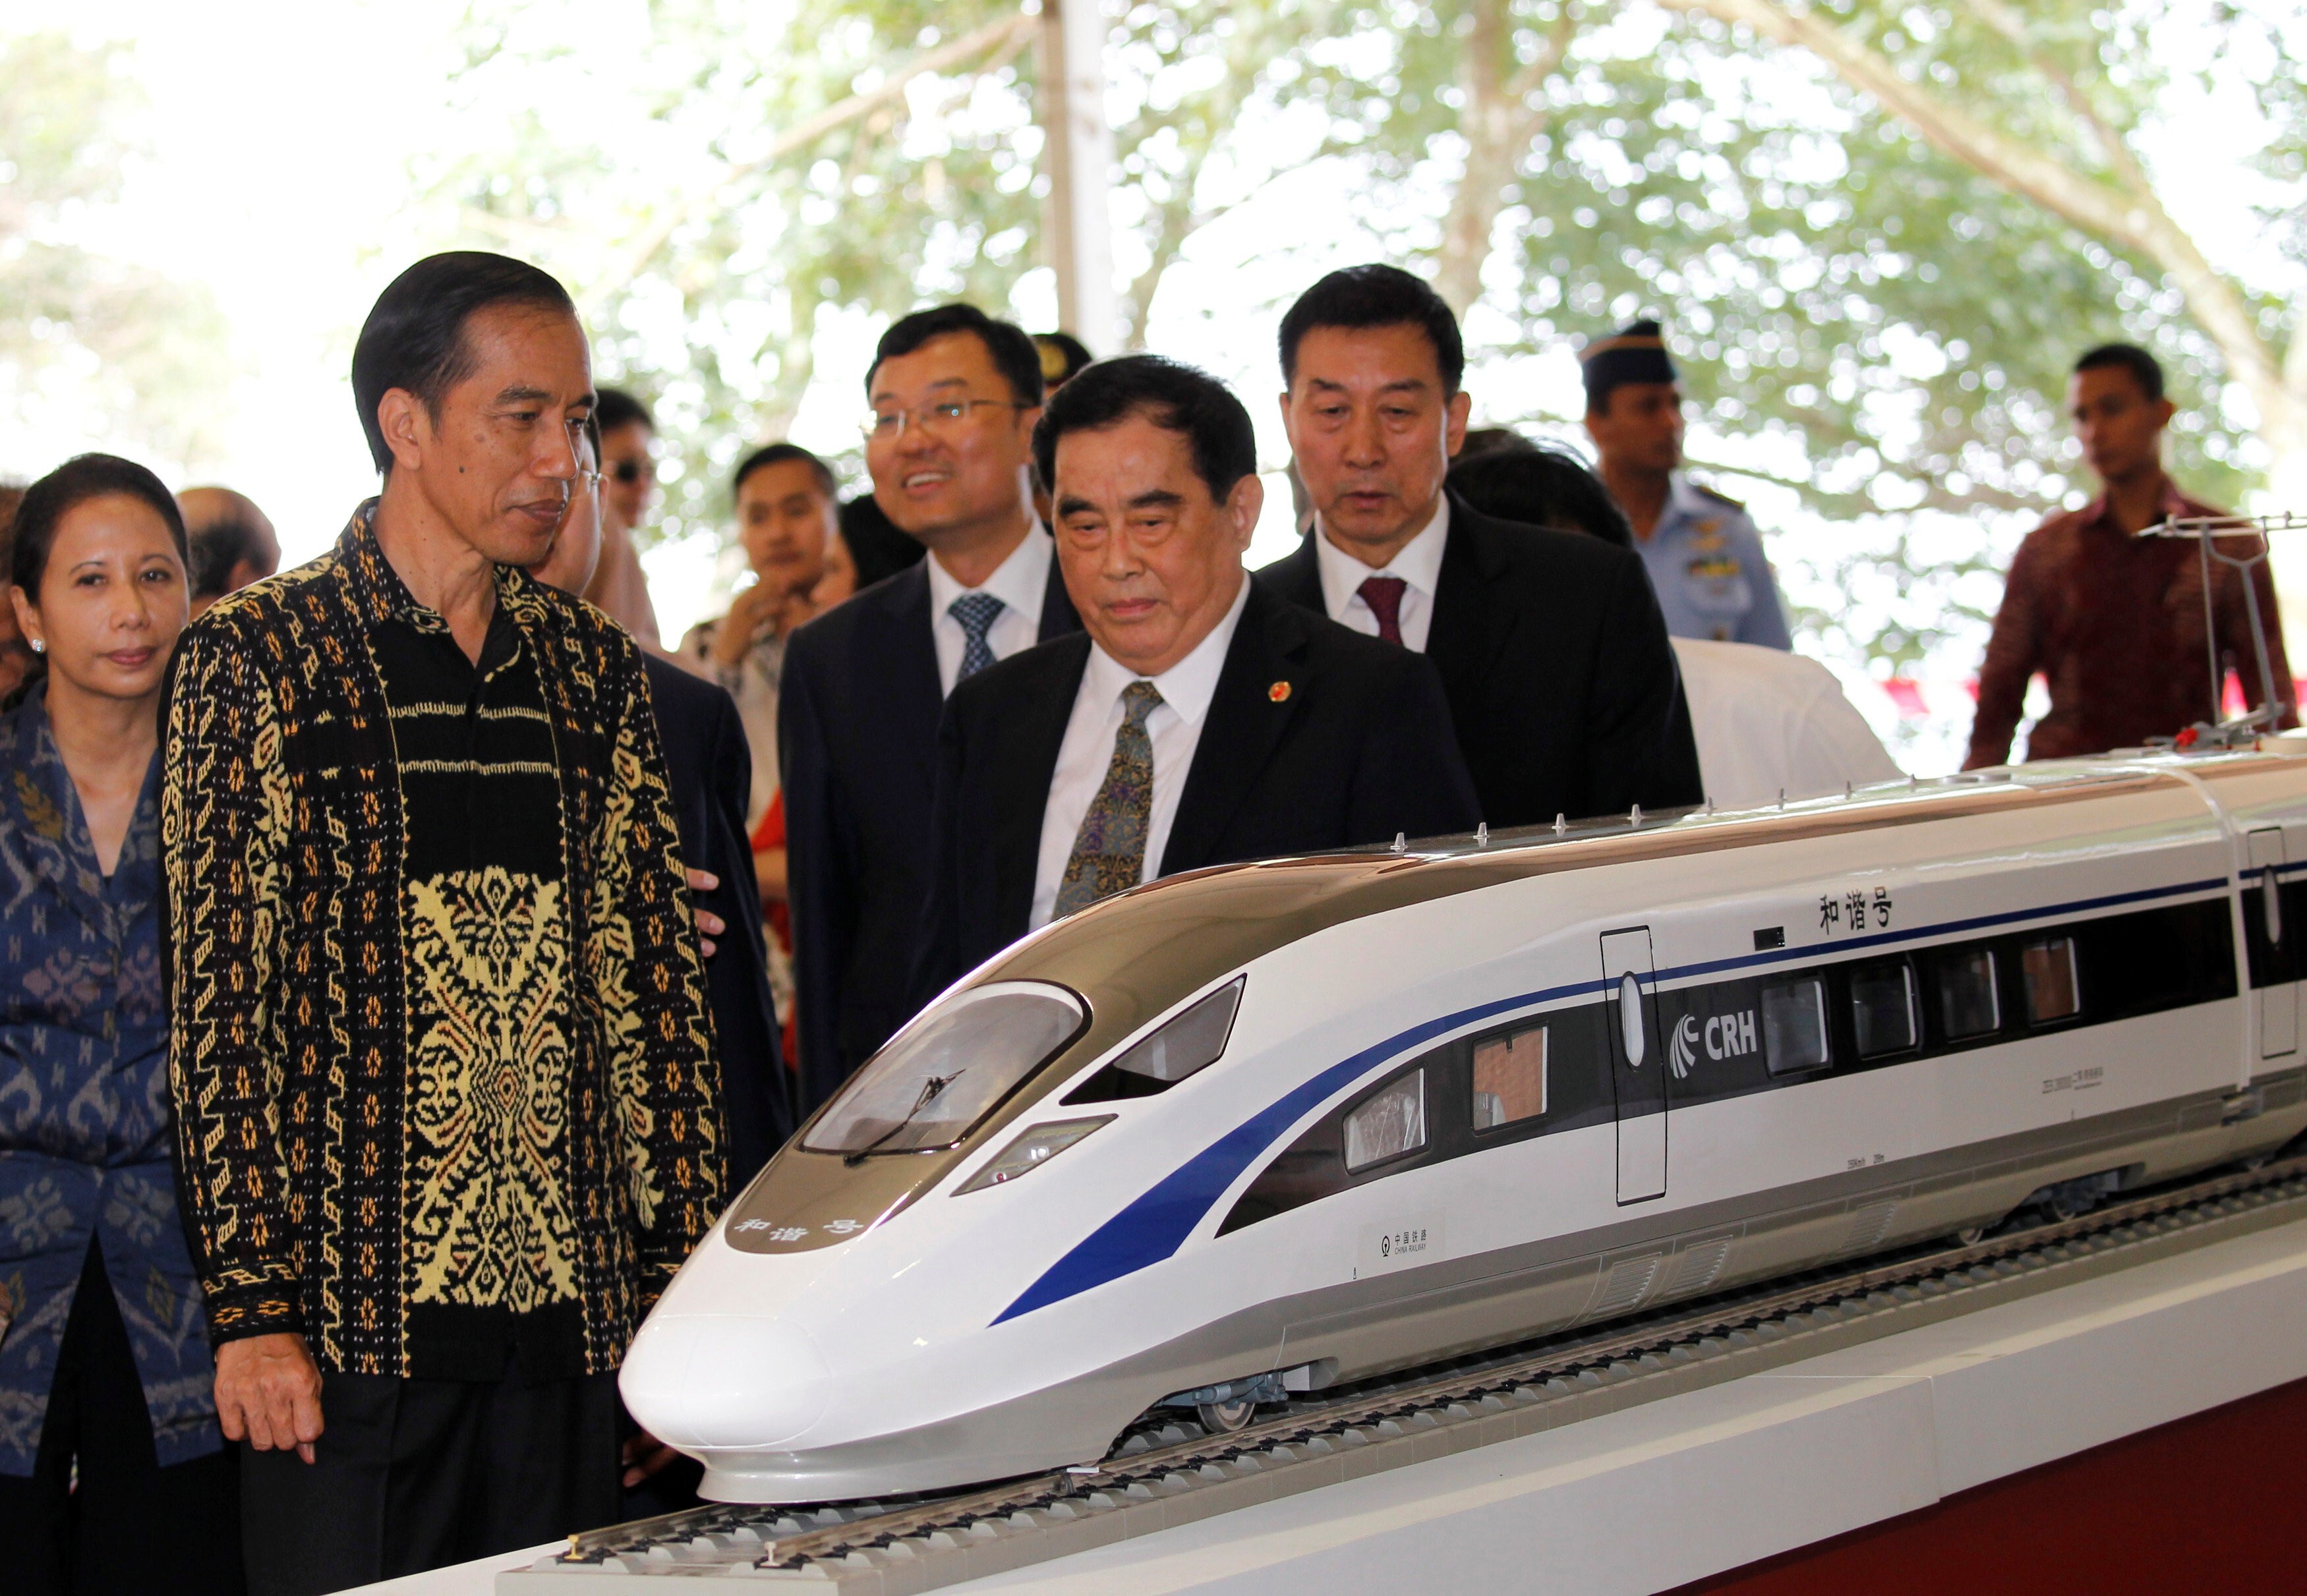 Indonesia’s President Joko Widodo and the then general manager of China Railway Corp, Sheng Guangzu, at the 2016 groundbreaking ceremony for the Jakarta-Bandung high-speed railway line. Photo: Reuters